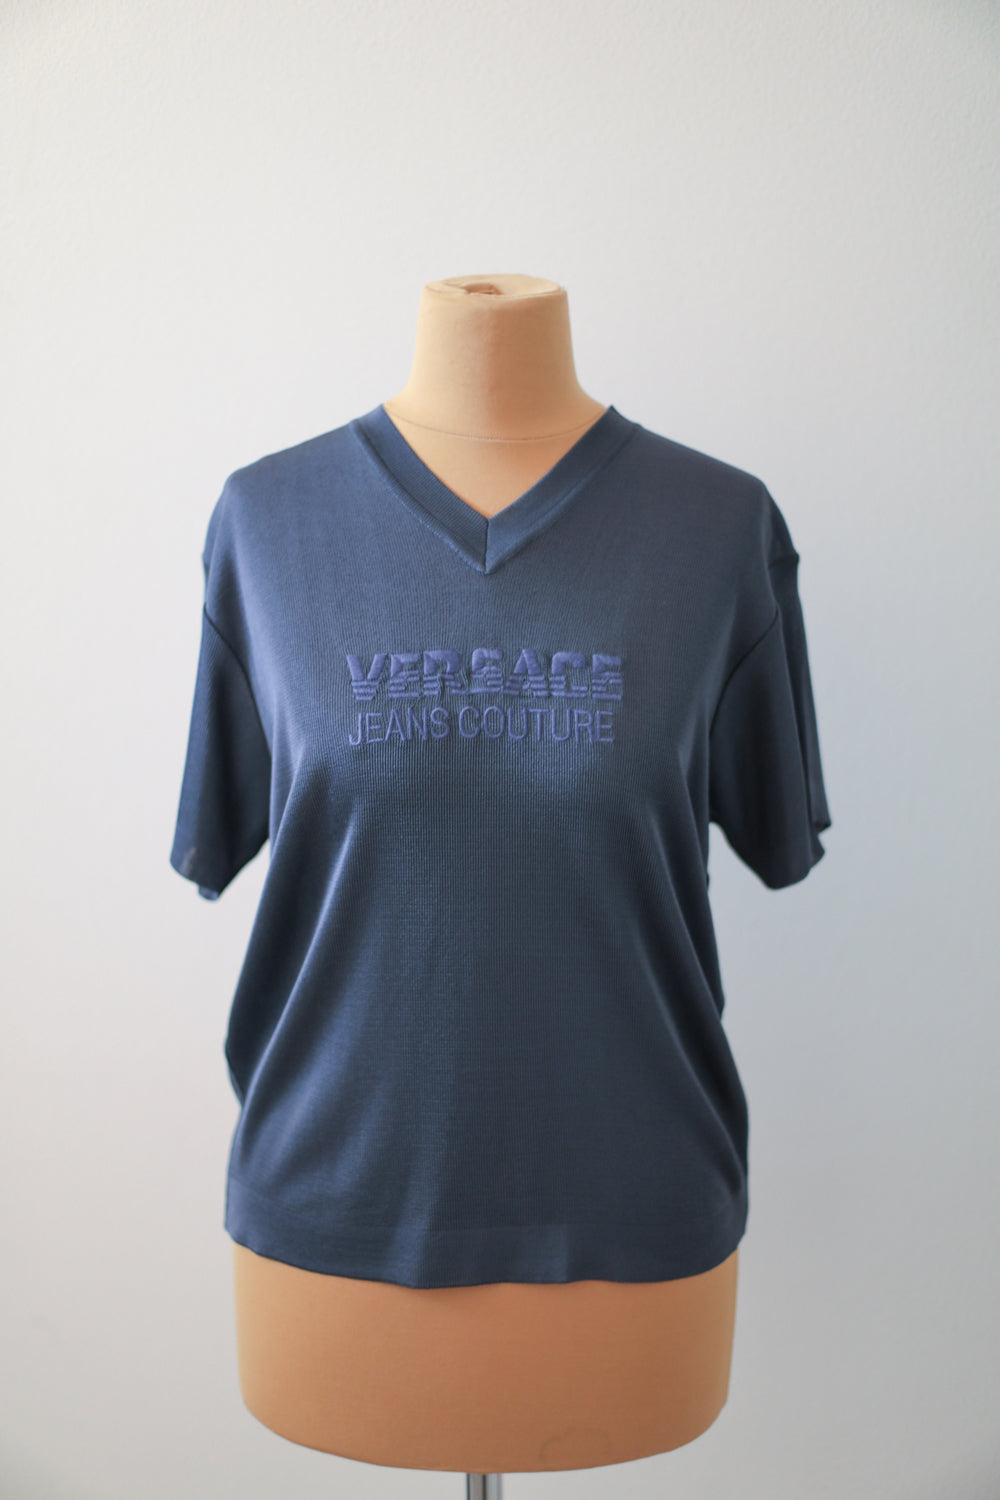 Versace Jeans Couture Viscose 90s Vintage Rayon Tee